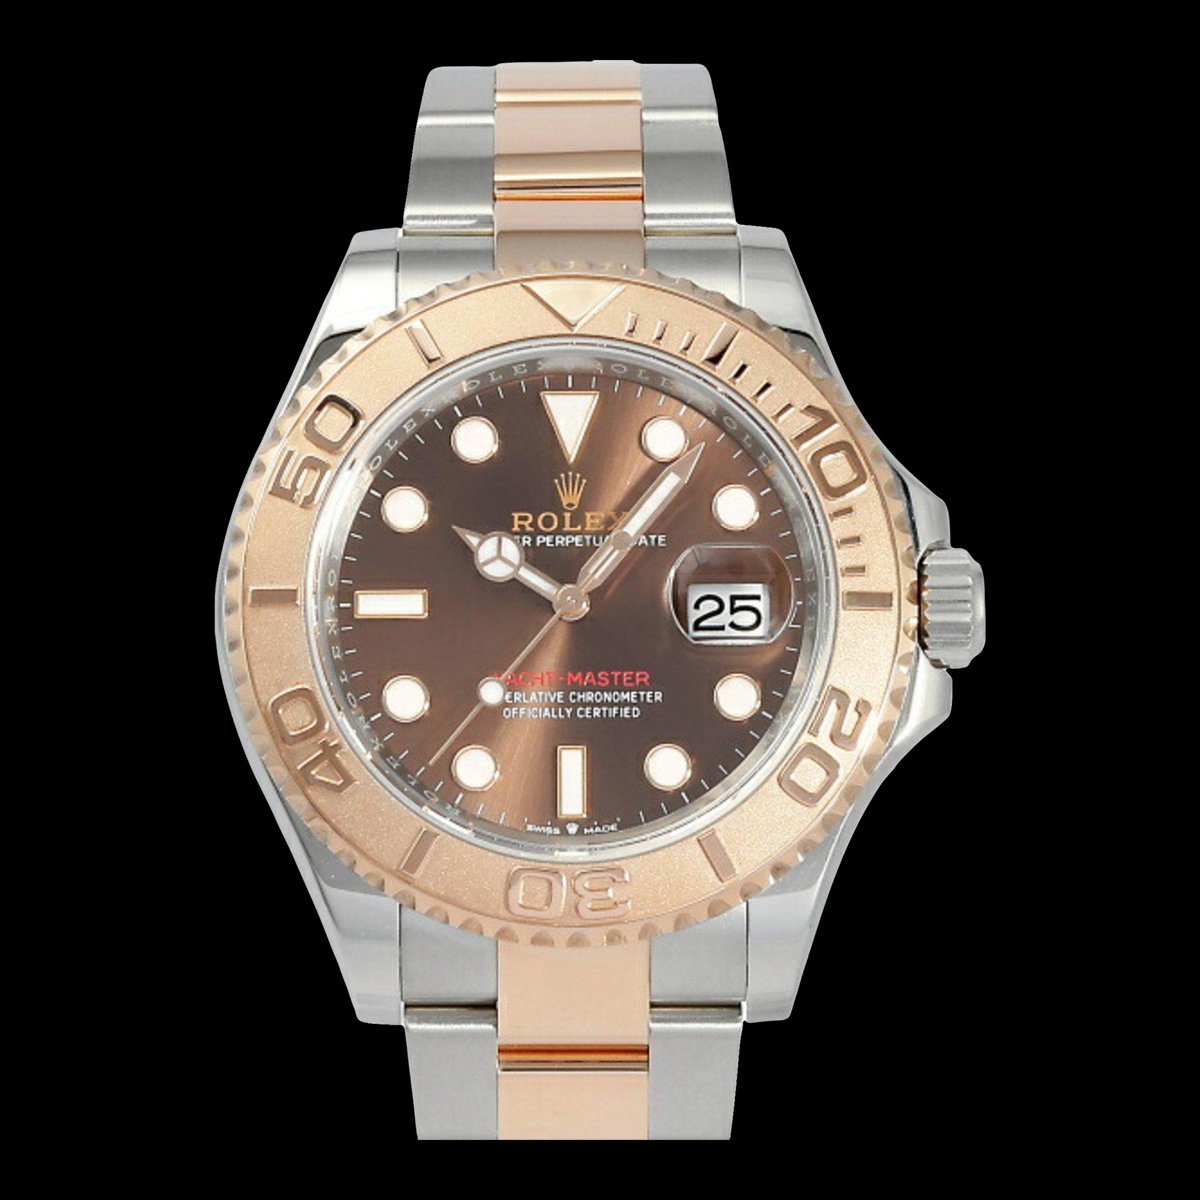 ROLEX Yacht Master 126621 Chocolate Dial Watch Men's for sale at Pamono